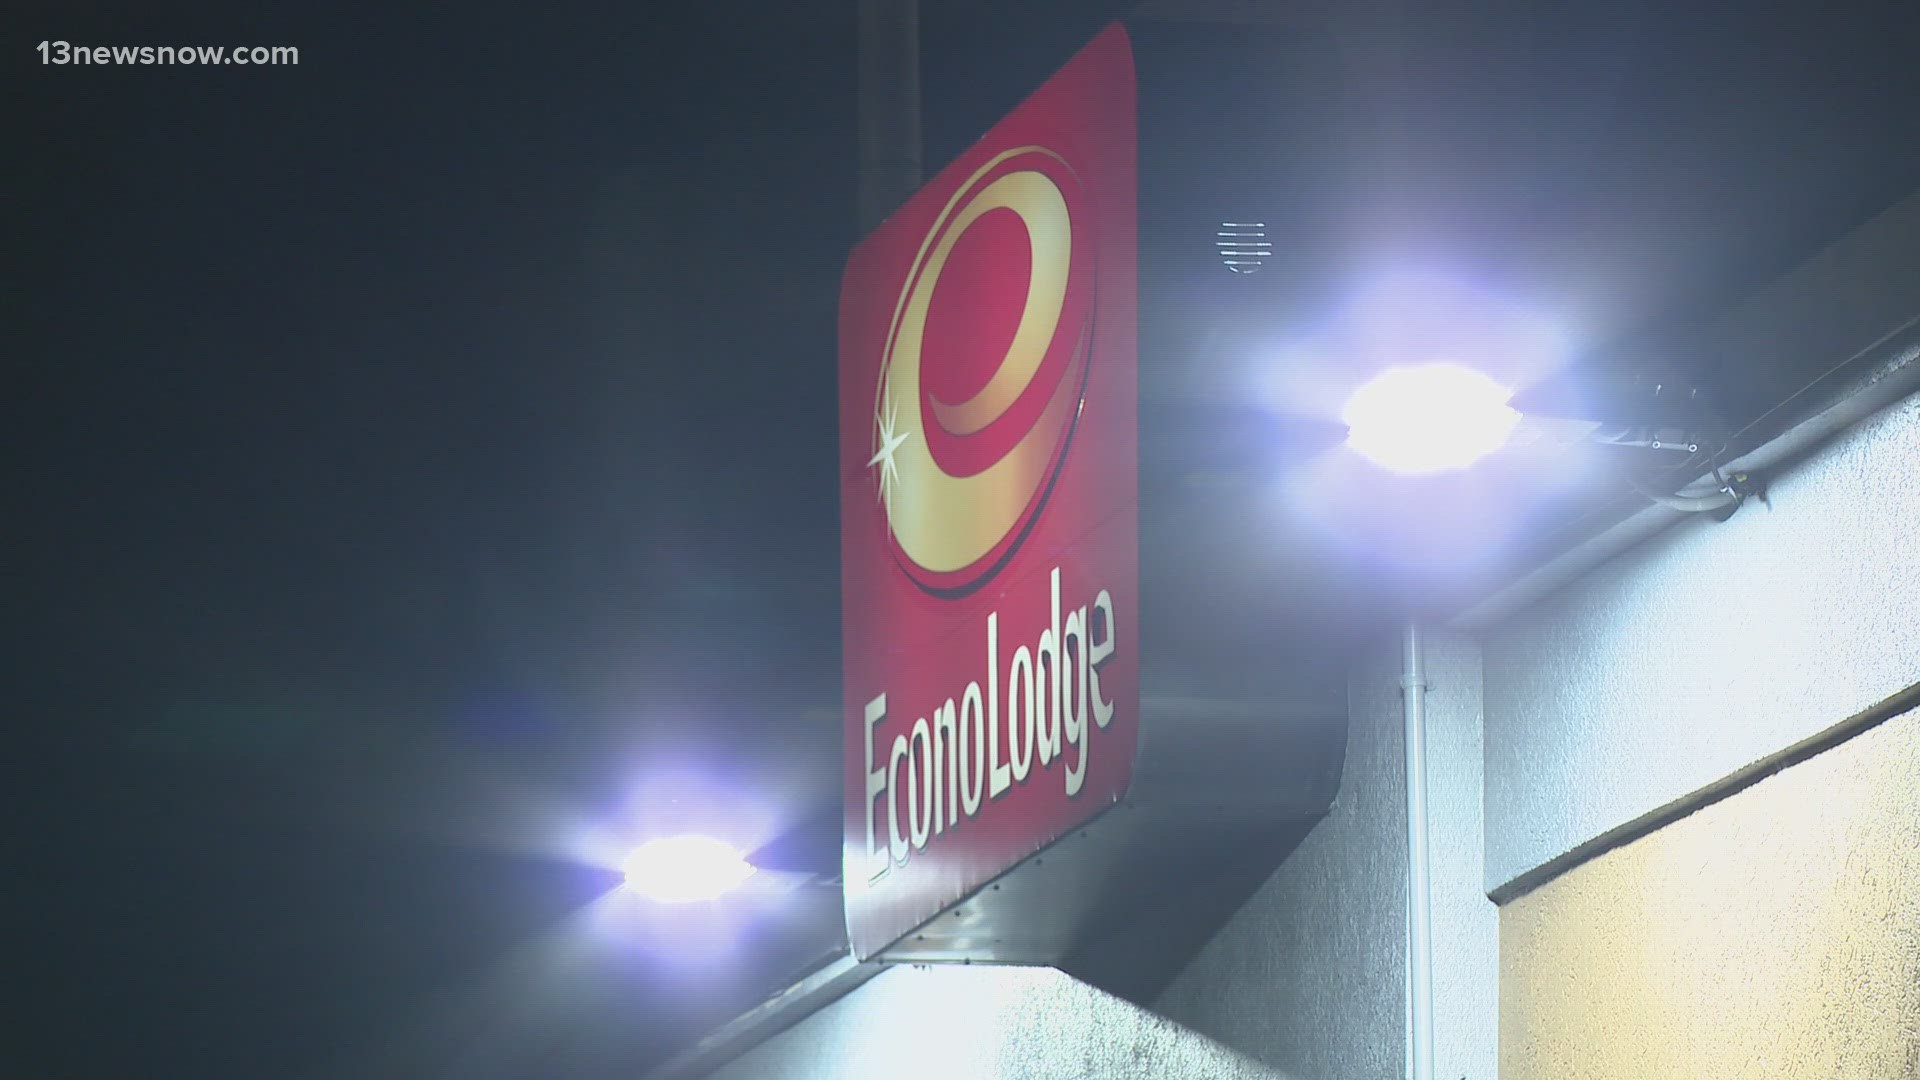 According to investigators, around 5:20 a.m. police were called to the Econo Lodge along North Military Highway for reports of a gunshot victim.